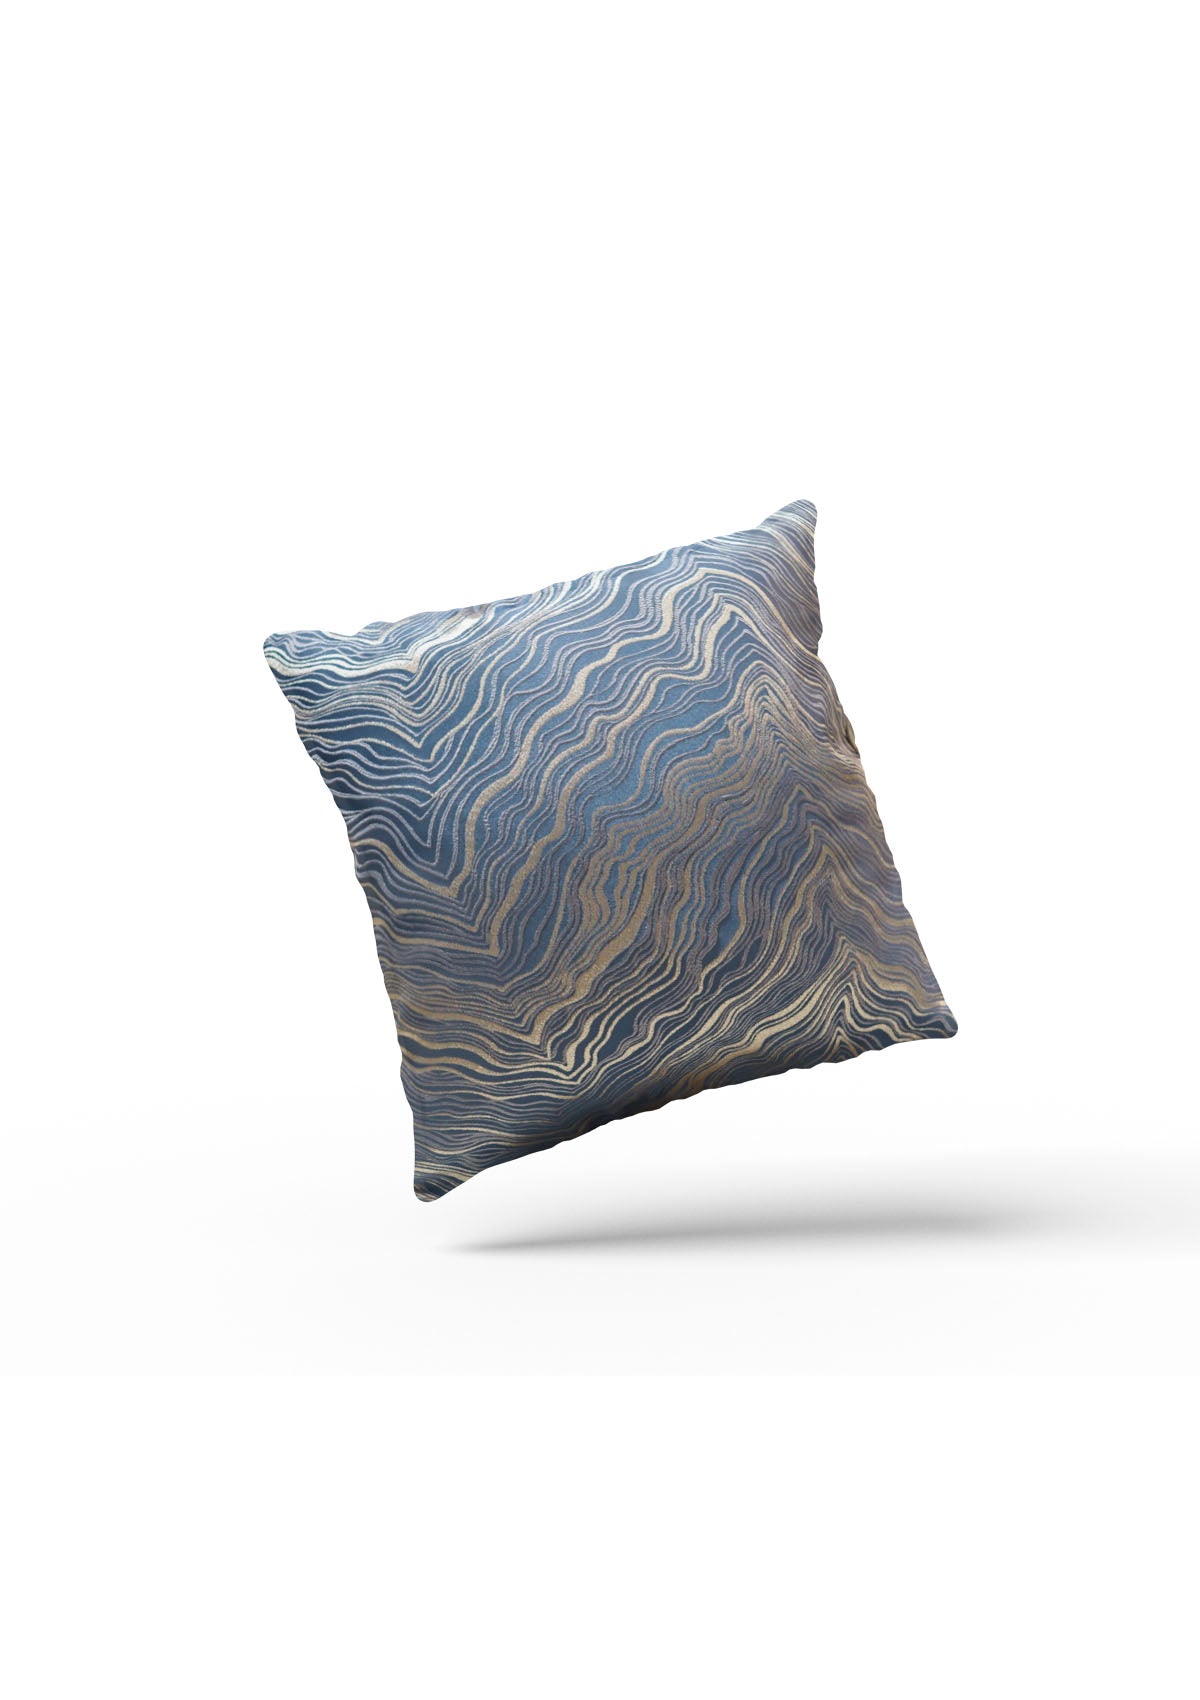 Sophisticated navy blue and gold cushion cover with textured fabric